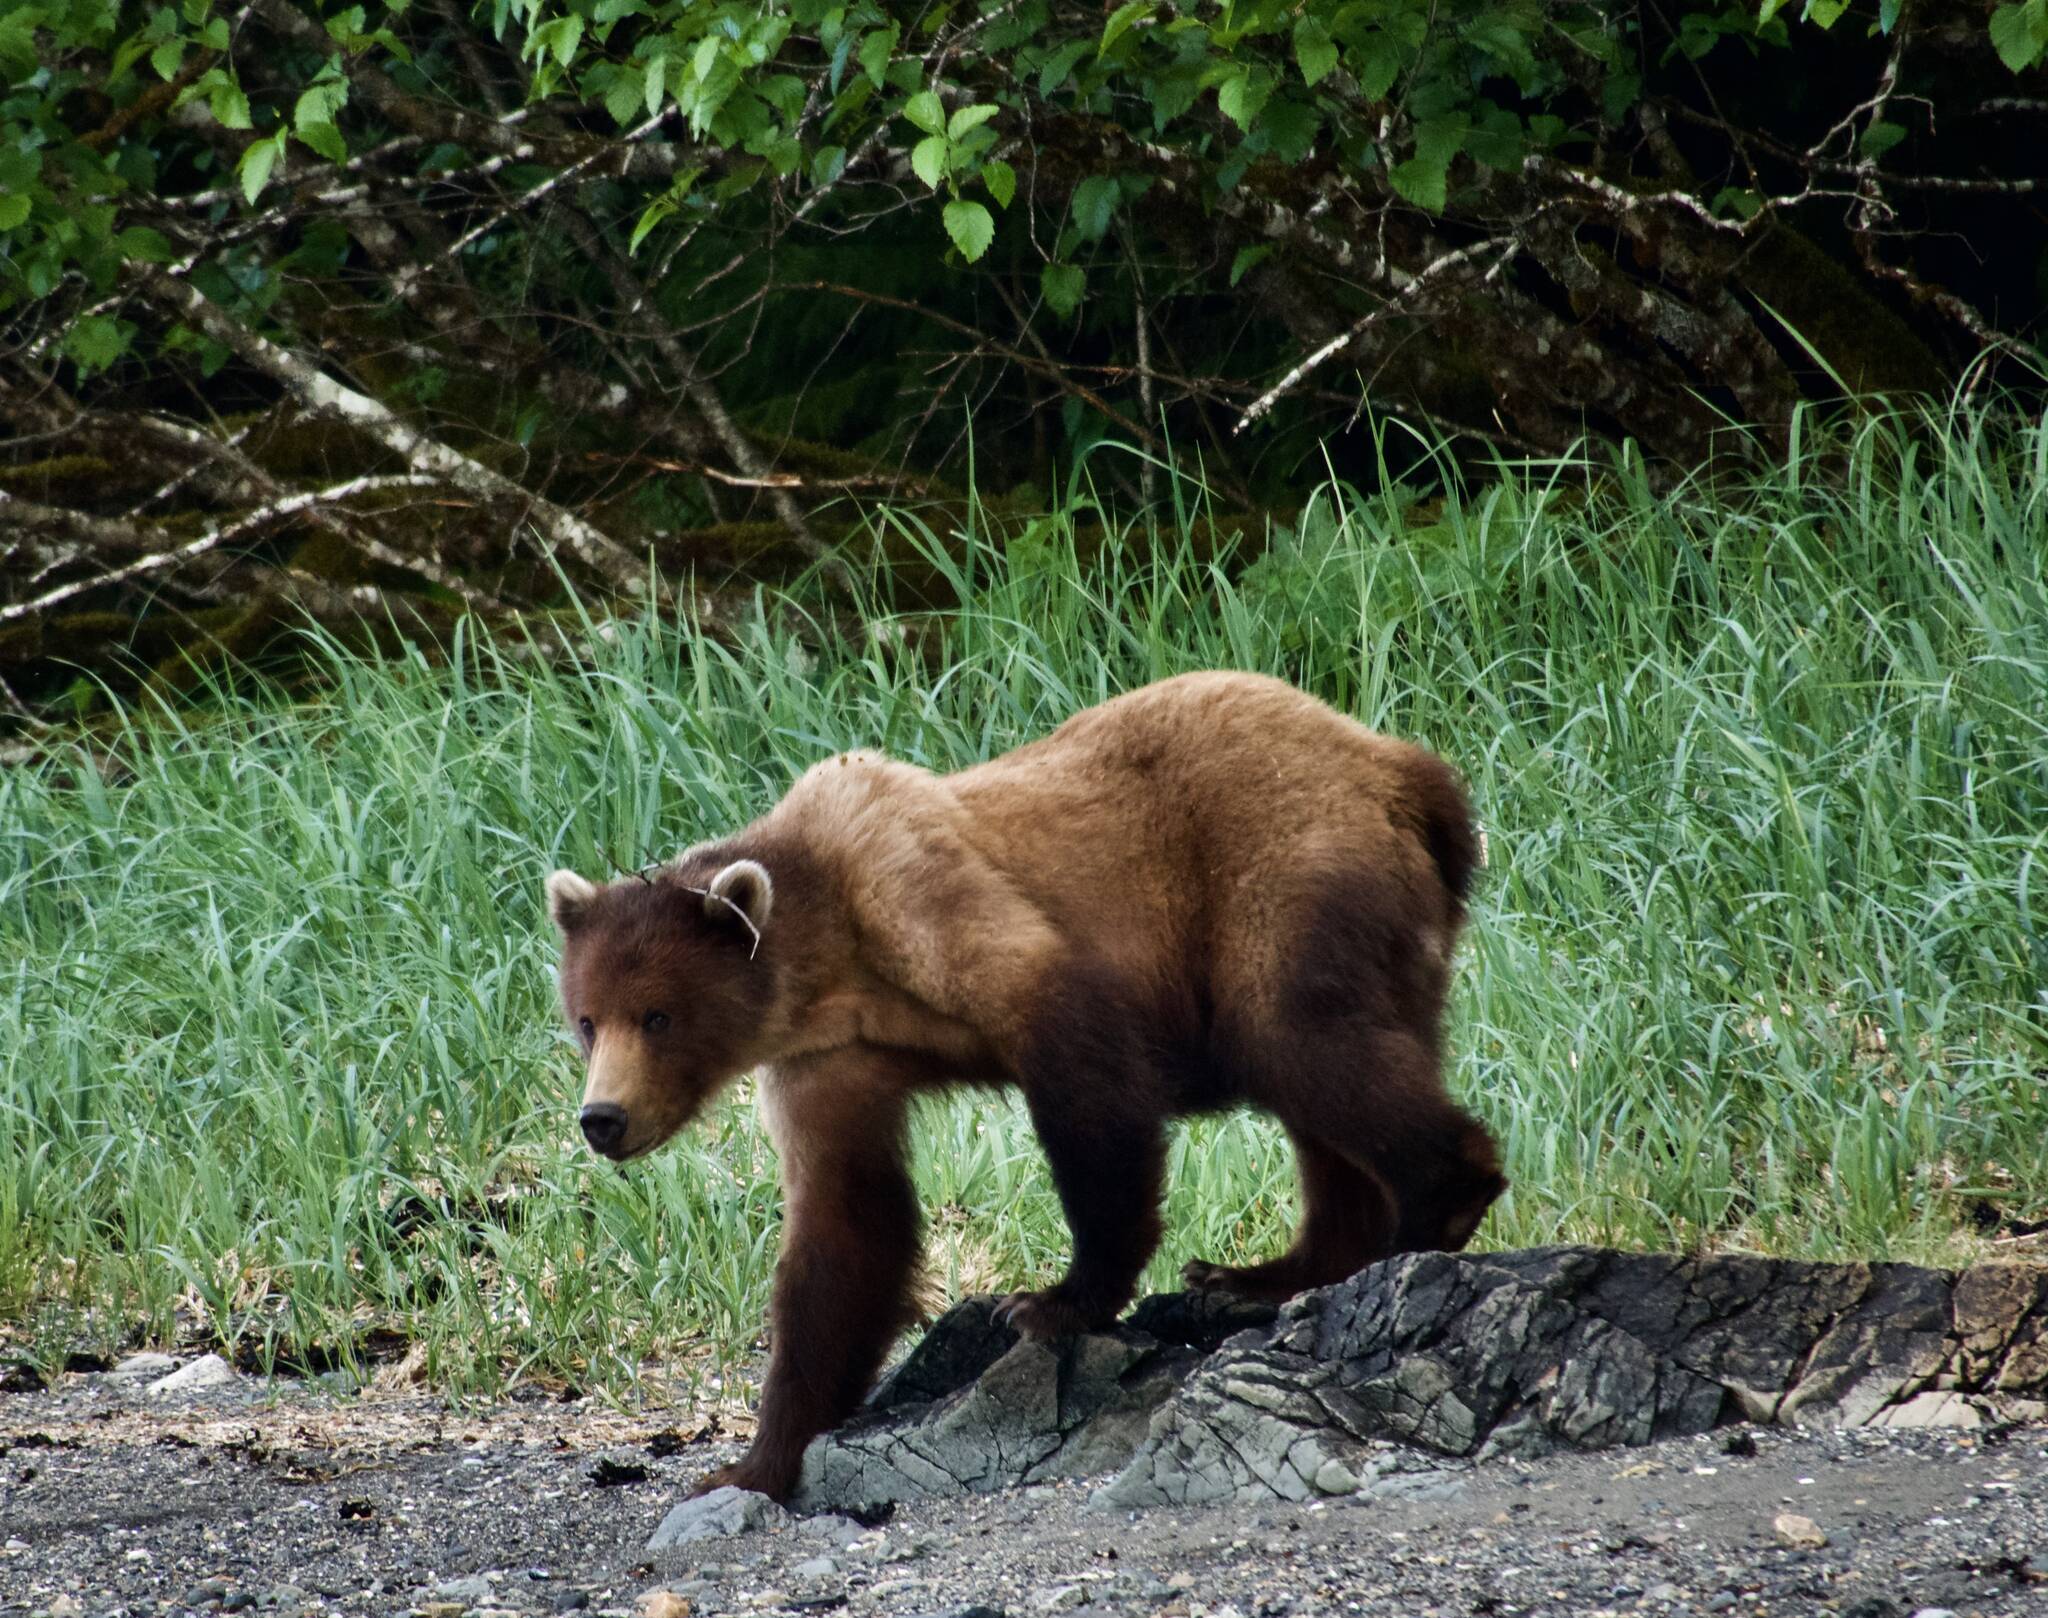 A brown bear in Mole Harbor, at the beginning of the trail system on the Cross-Admiralty Canoe Route. (Courtesy Photo / Bjorn Dihle)